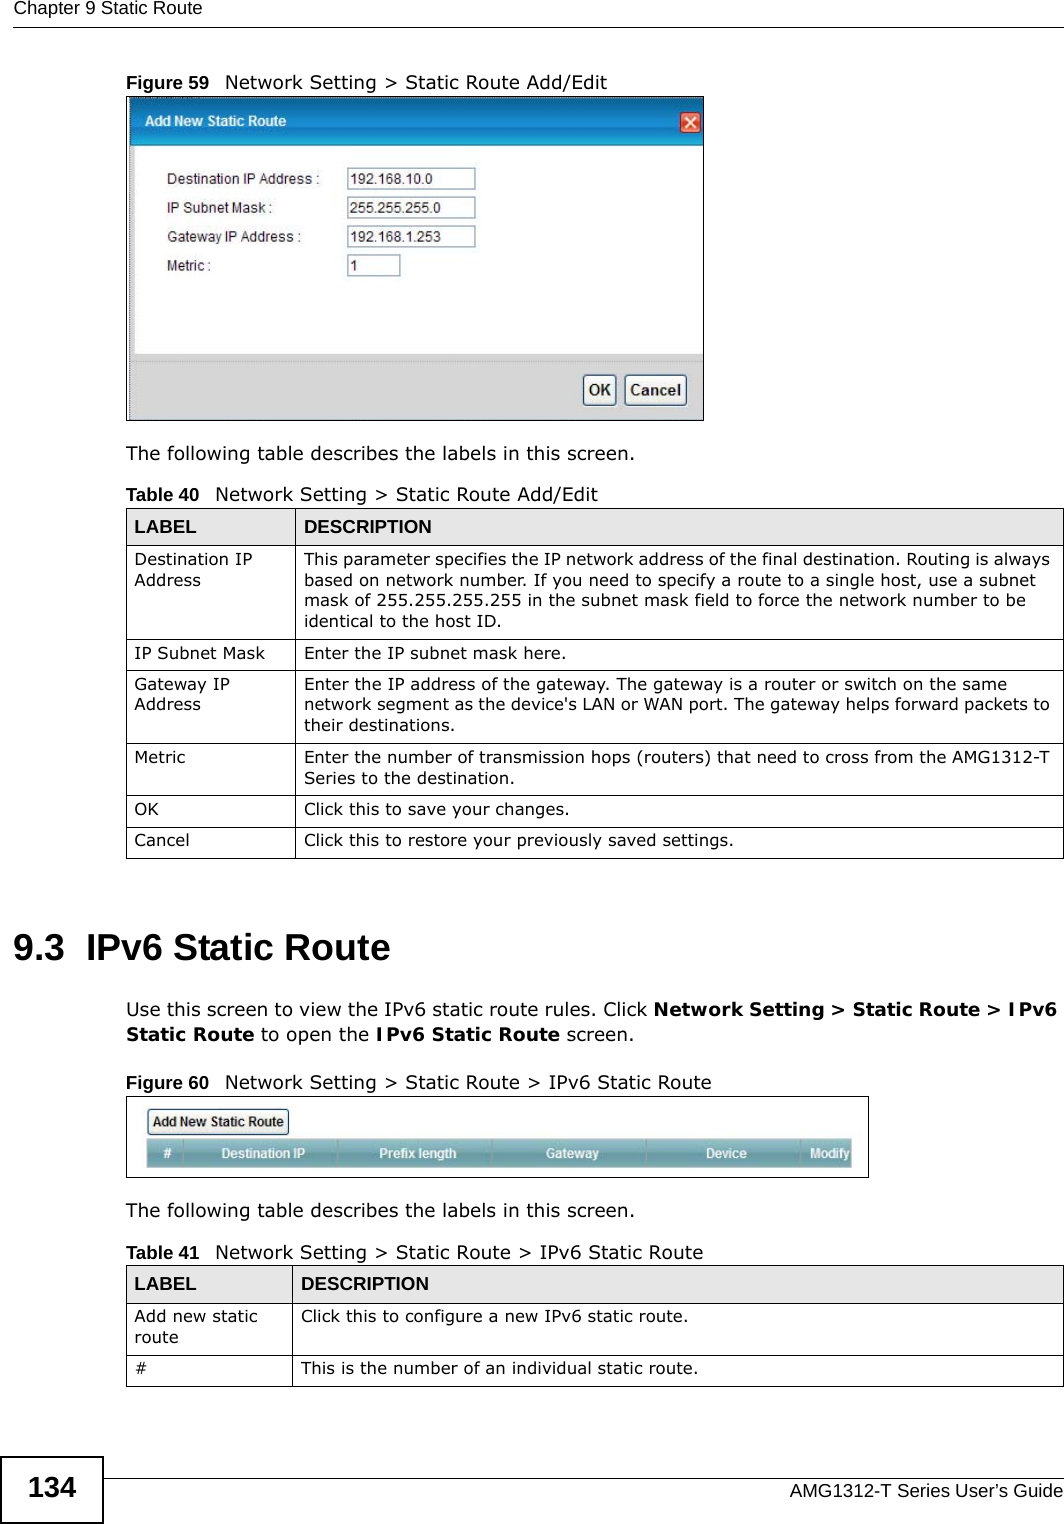 Chapter 9 Static RouteAMG1312-T Series User’s Guide134Figure 59   Network Setting &gt; Static Route Add/EditThe following table describes the labels in this screen. 9.3  IPv6 Static RouteUse this screen to view the IPv6 static route rules. Click Network Setting &gt; Static Route &gt; IPv6 Static Route to open the IPv6 Static Route screen.Figure 60   Network Setting &gt; Static Route &gt; IPv6 Static RouteThe following table describes the labels in this screen. Table 40   Network Setting &gt; Static Route Add/EditLABEL DESCRIPTIONDestination IP AddressThis parameter specifies the IP network address of the final destination. Routing is always based on network number. If you need to specify a route to a single host, use a subnet mask of 255.255.255.255 in the subnet mask field to force the network number to be identical to the host ID.IP Subnet Mask  Enter the IP subnet mask here.Gateway IP AddressEnter the IP address of the gateway. The gateway is a router or switch on the same network segment as the device&apos;s LAN or WAN port. The gateway helps forward packets to their destinations.Metric Enter the number of transmission hops (routers) that need to cross from the AMG1312-T Series to the destination.OK Click this to save your changes.Cancel Click this to restore your previously saved settings.Table 41   Network Setting &gt; Static Route &gt; IPv6 Static RouteLABEL DESCRIPTIONAdd new static routeClick this to configure a new IPv6 static route.#This is the number of an individual static route.